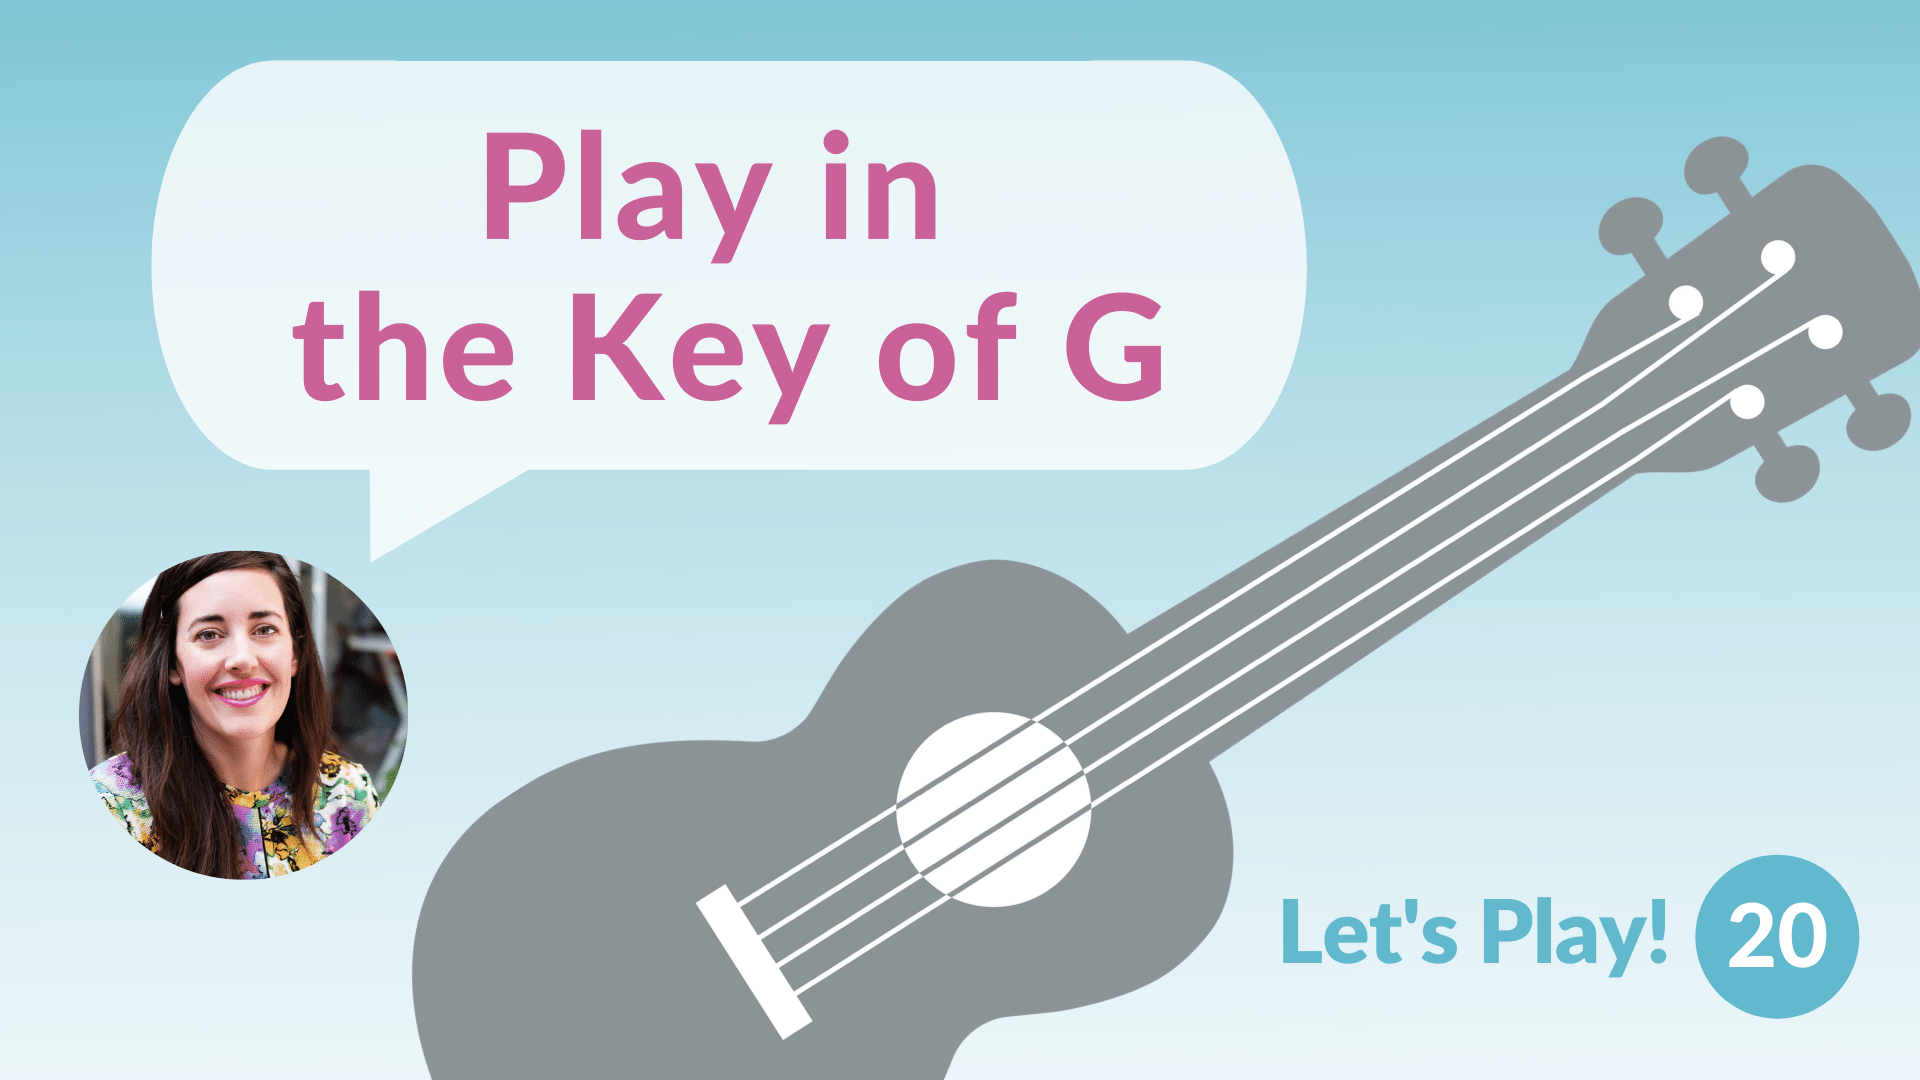 Play in the Key of G